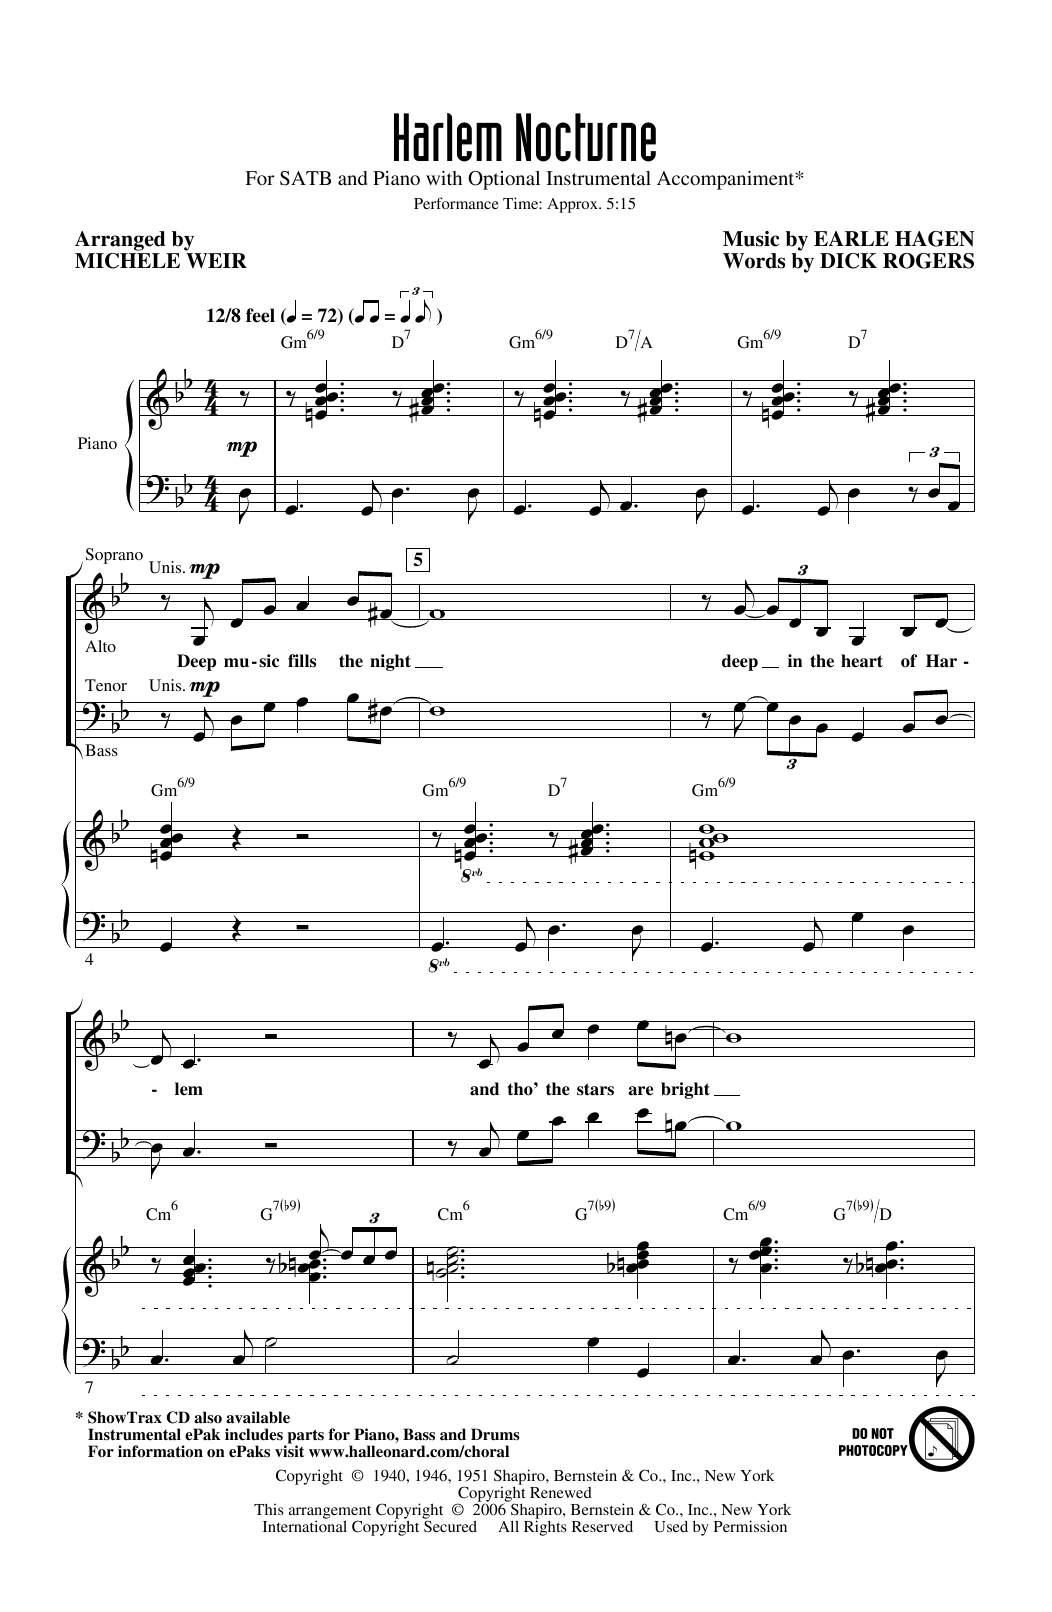 Download Earle Hagen and Dick Rogers Harlem Nocturne (arr. Michele Weir) Sheet Music